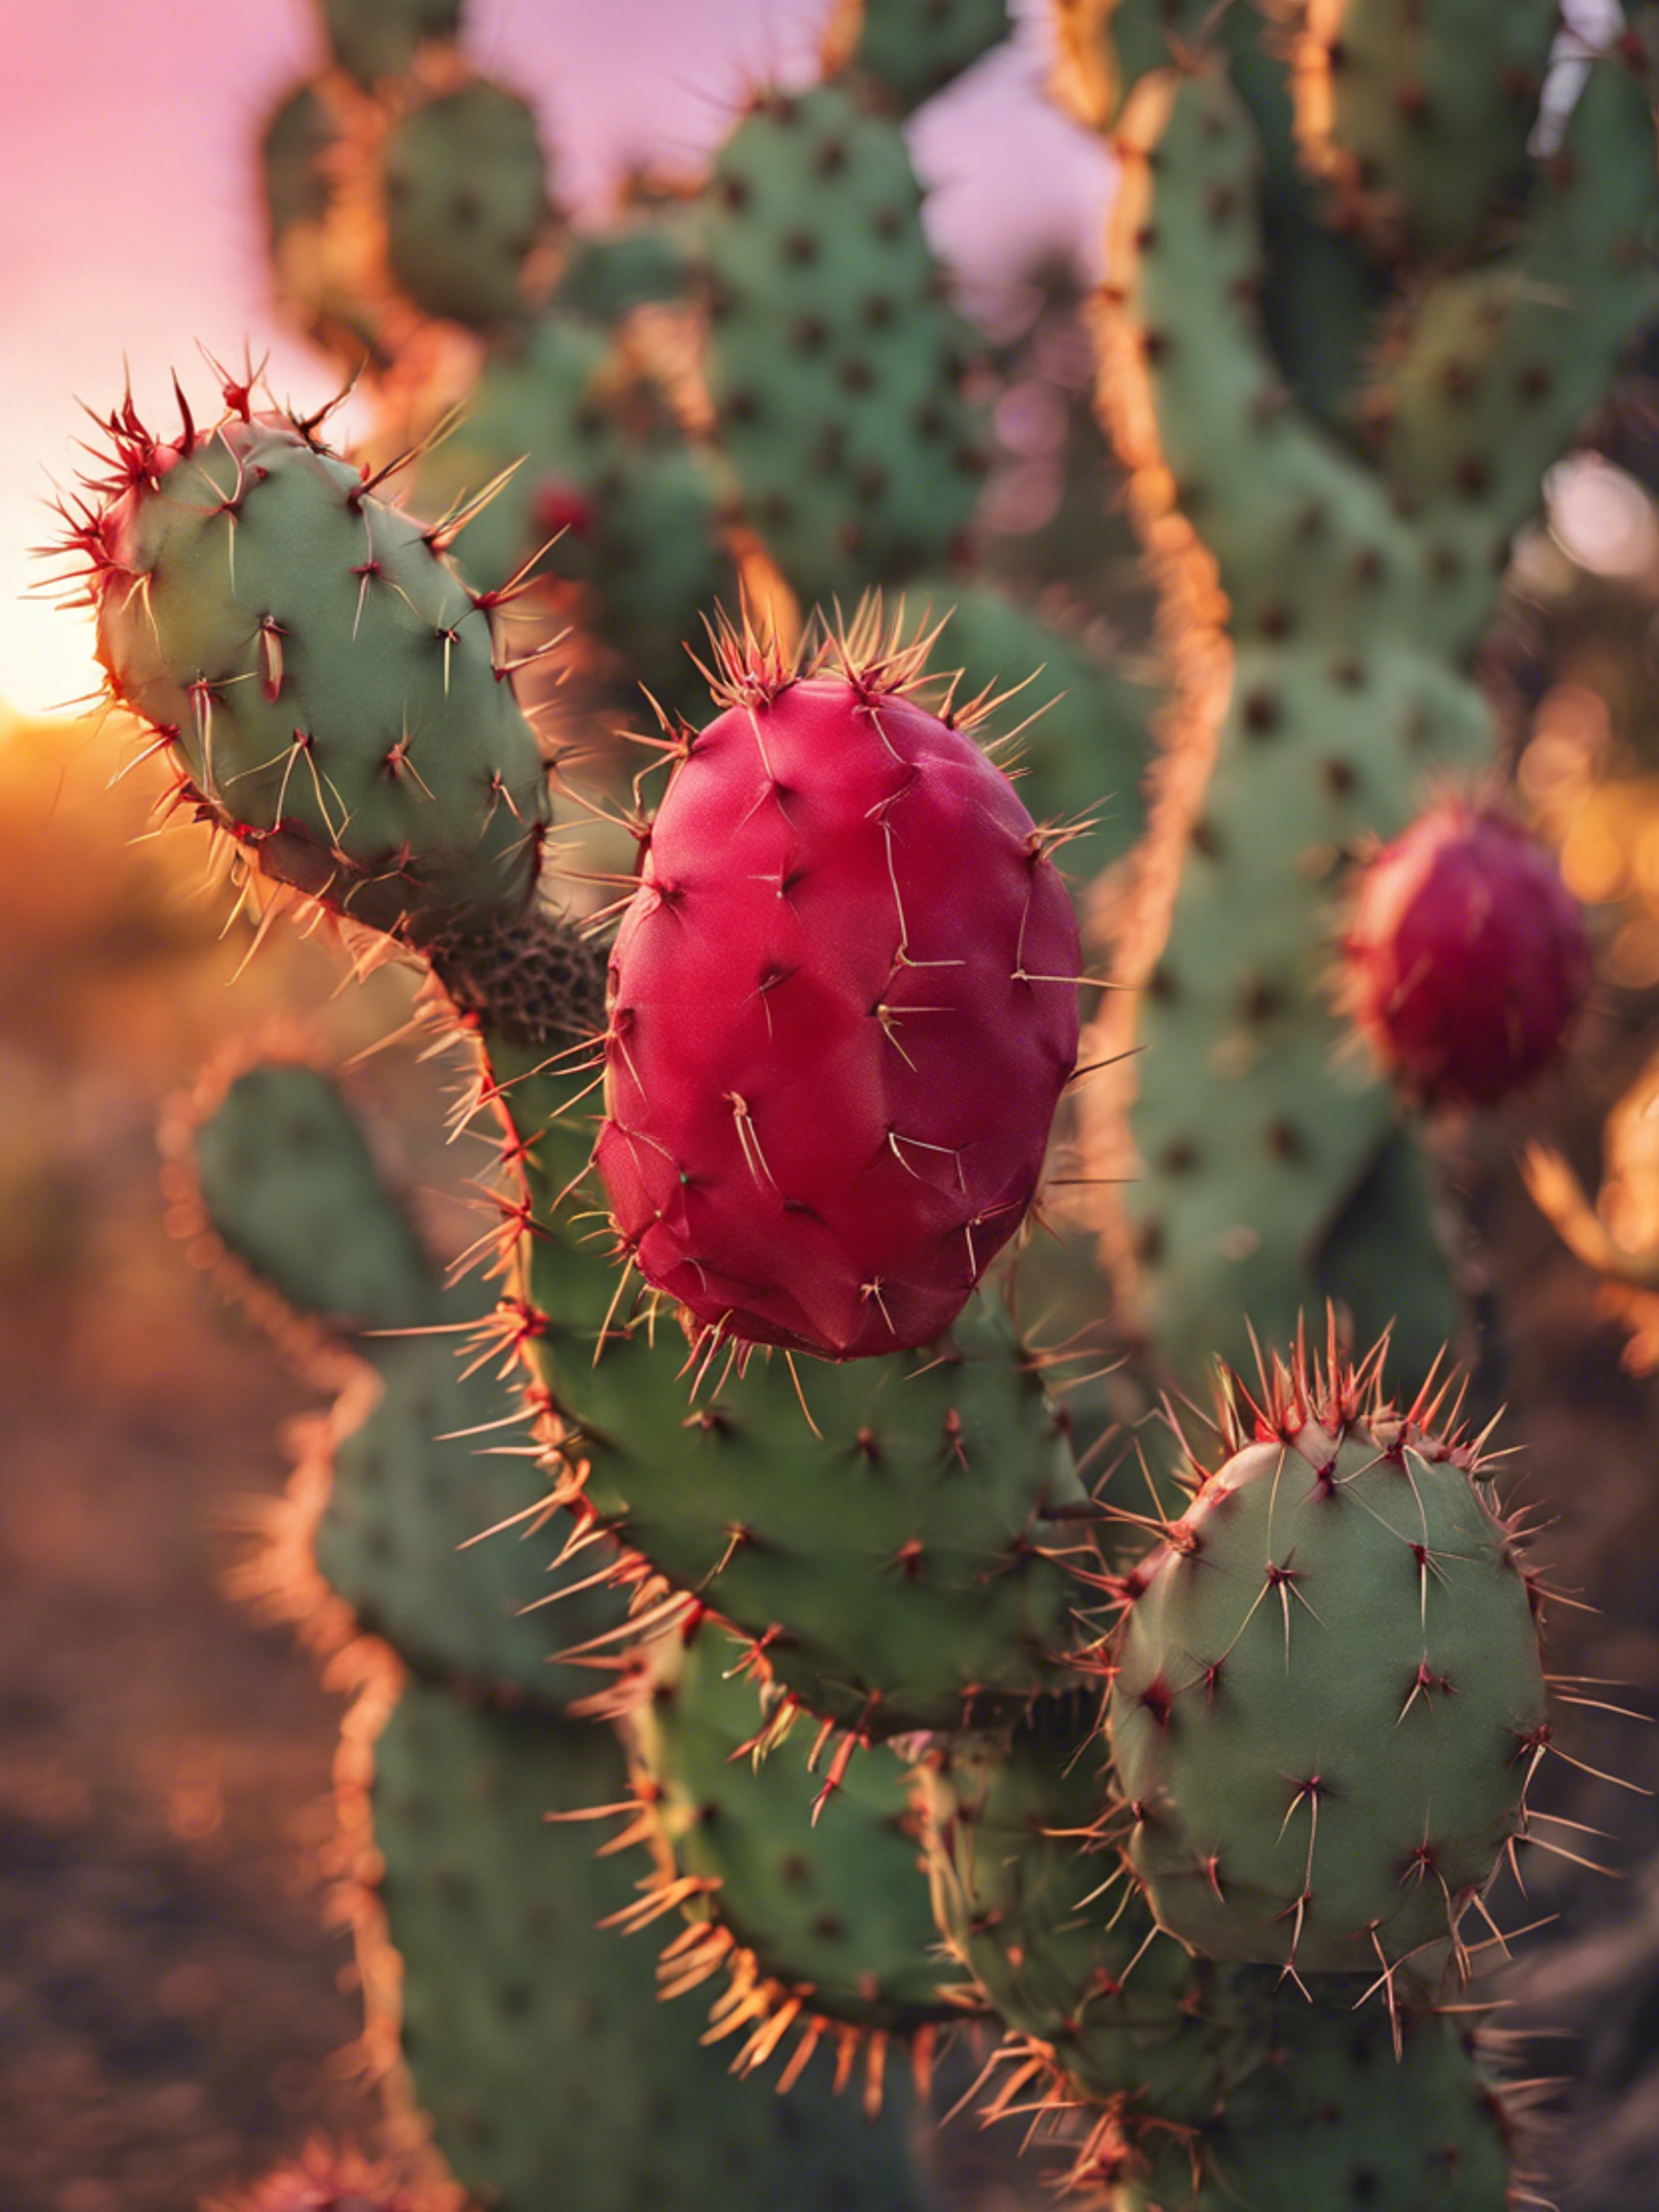 A prickly pear cactus with ripe, red fruits against a sunset background.壁紙[5965817ee192450fa25b]